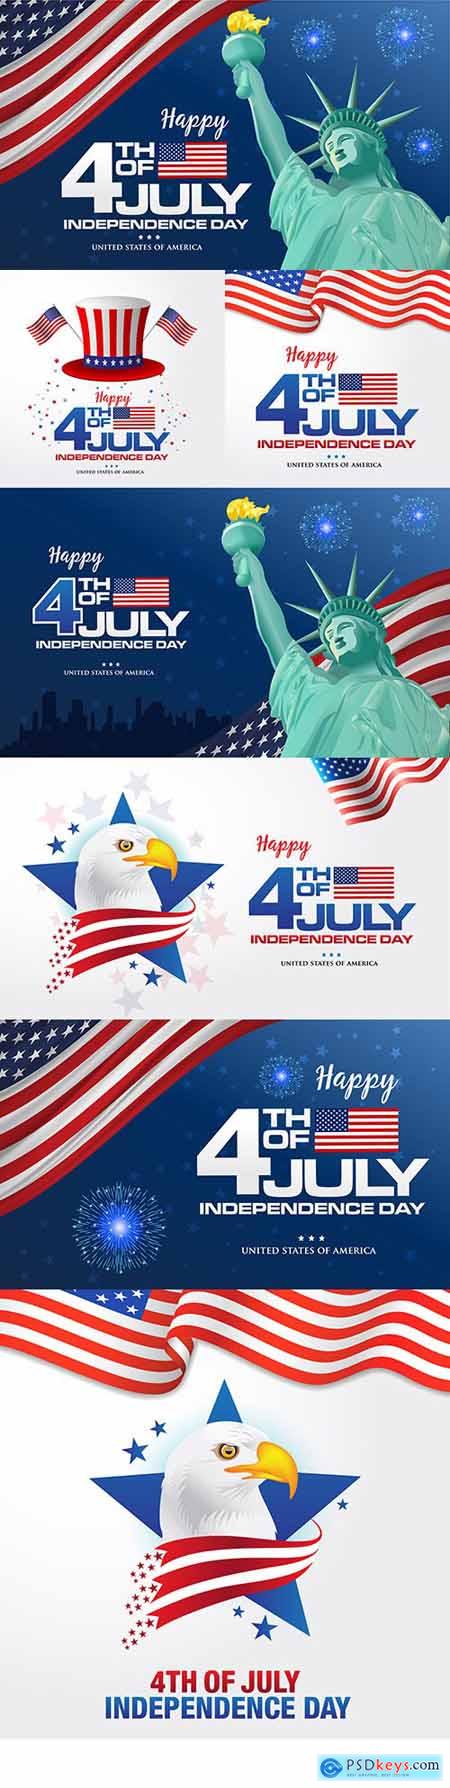 July 4 Independence Day America design illustrations 6